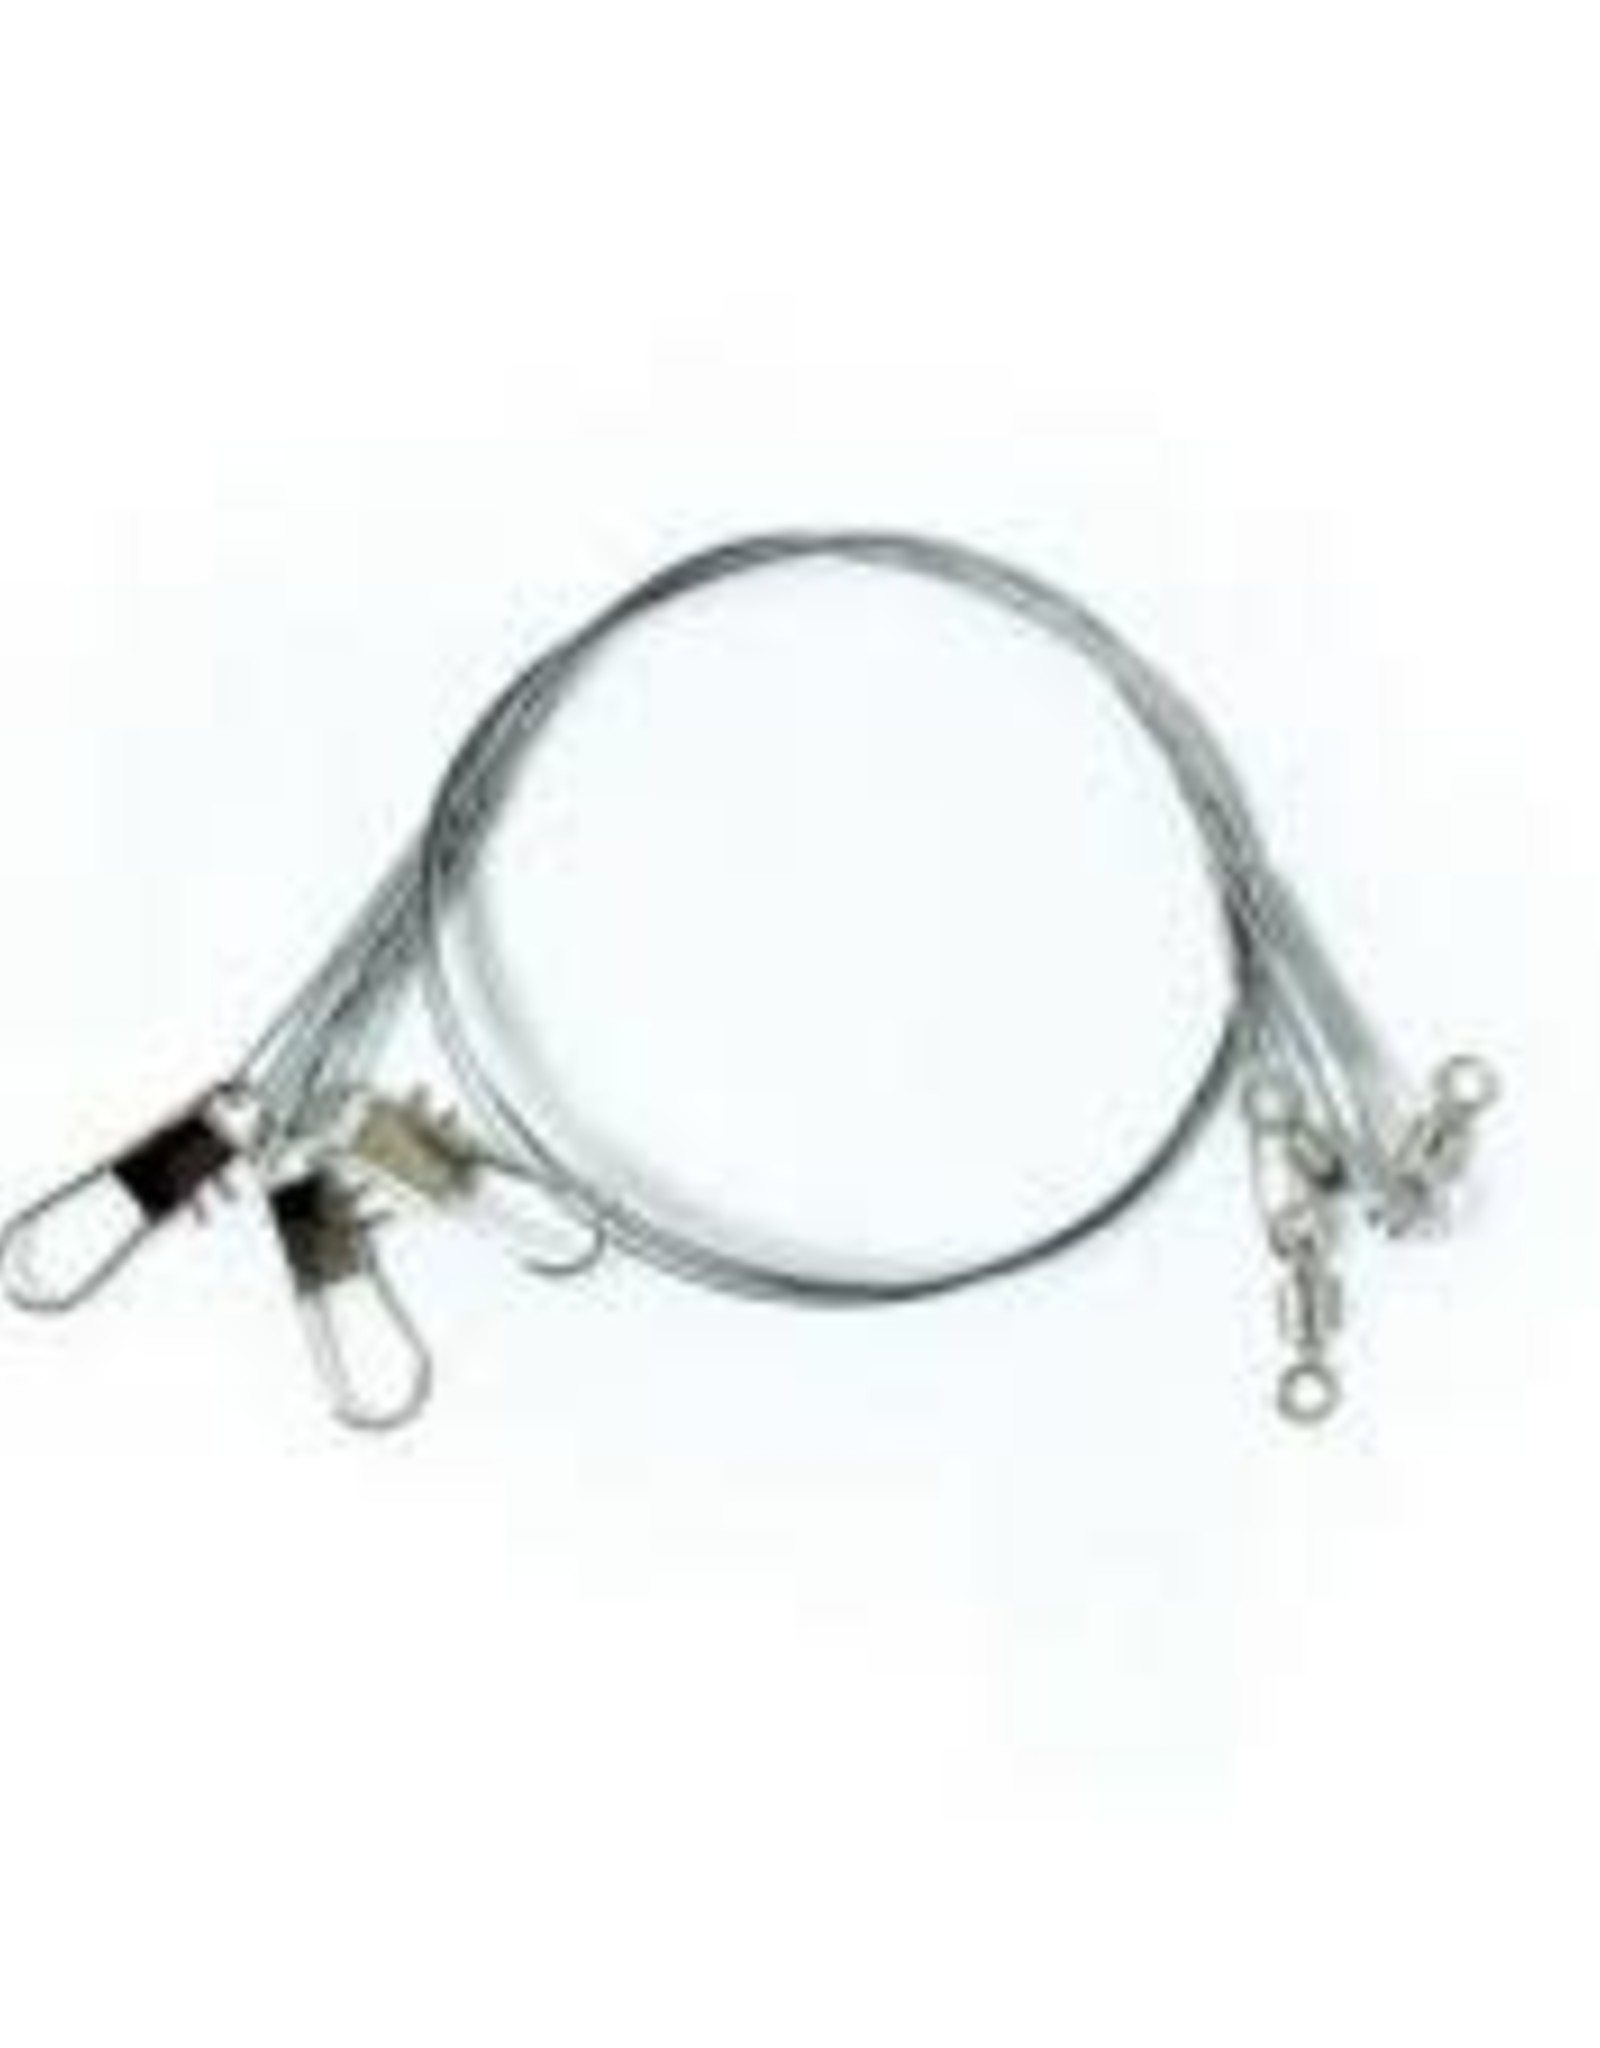 Eagle Claw Wire Leader